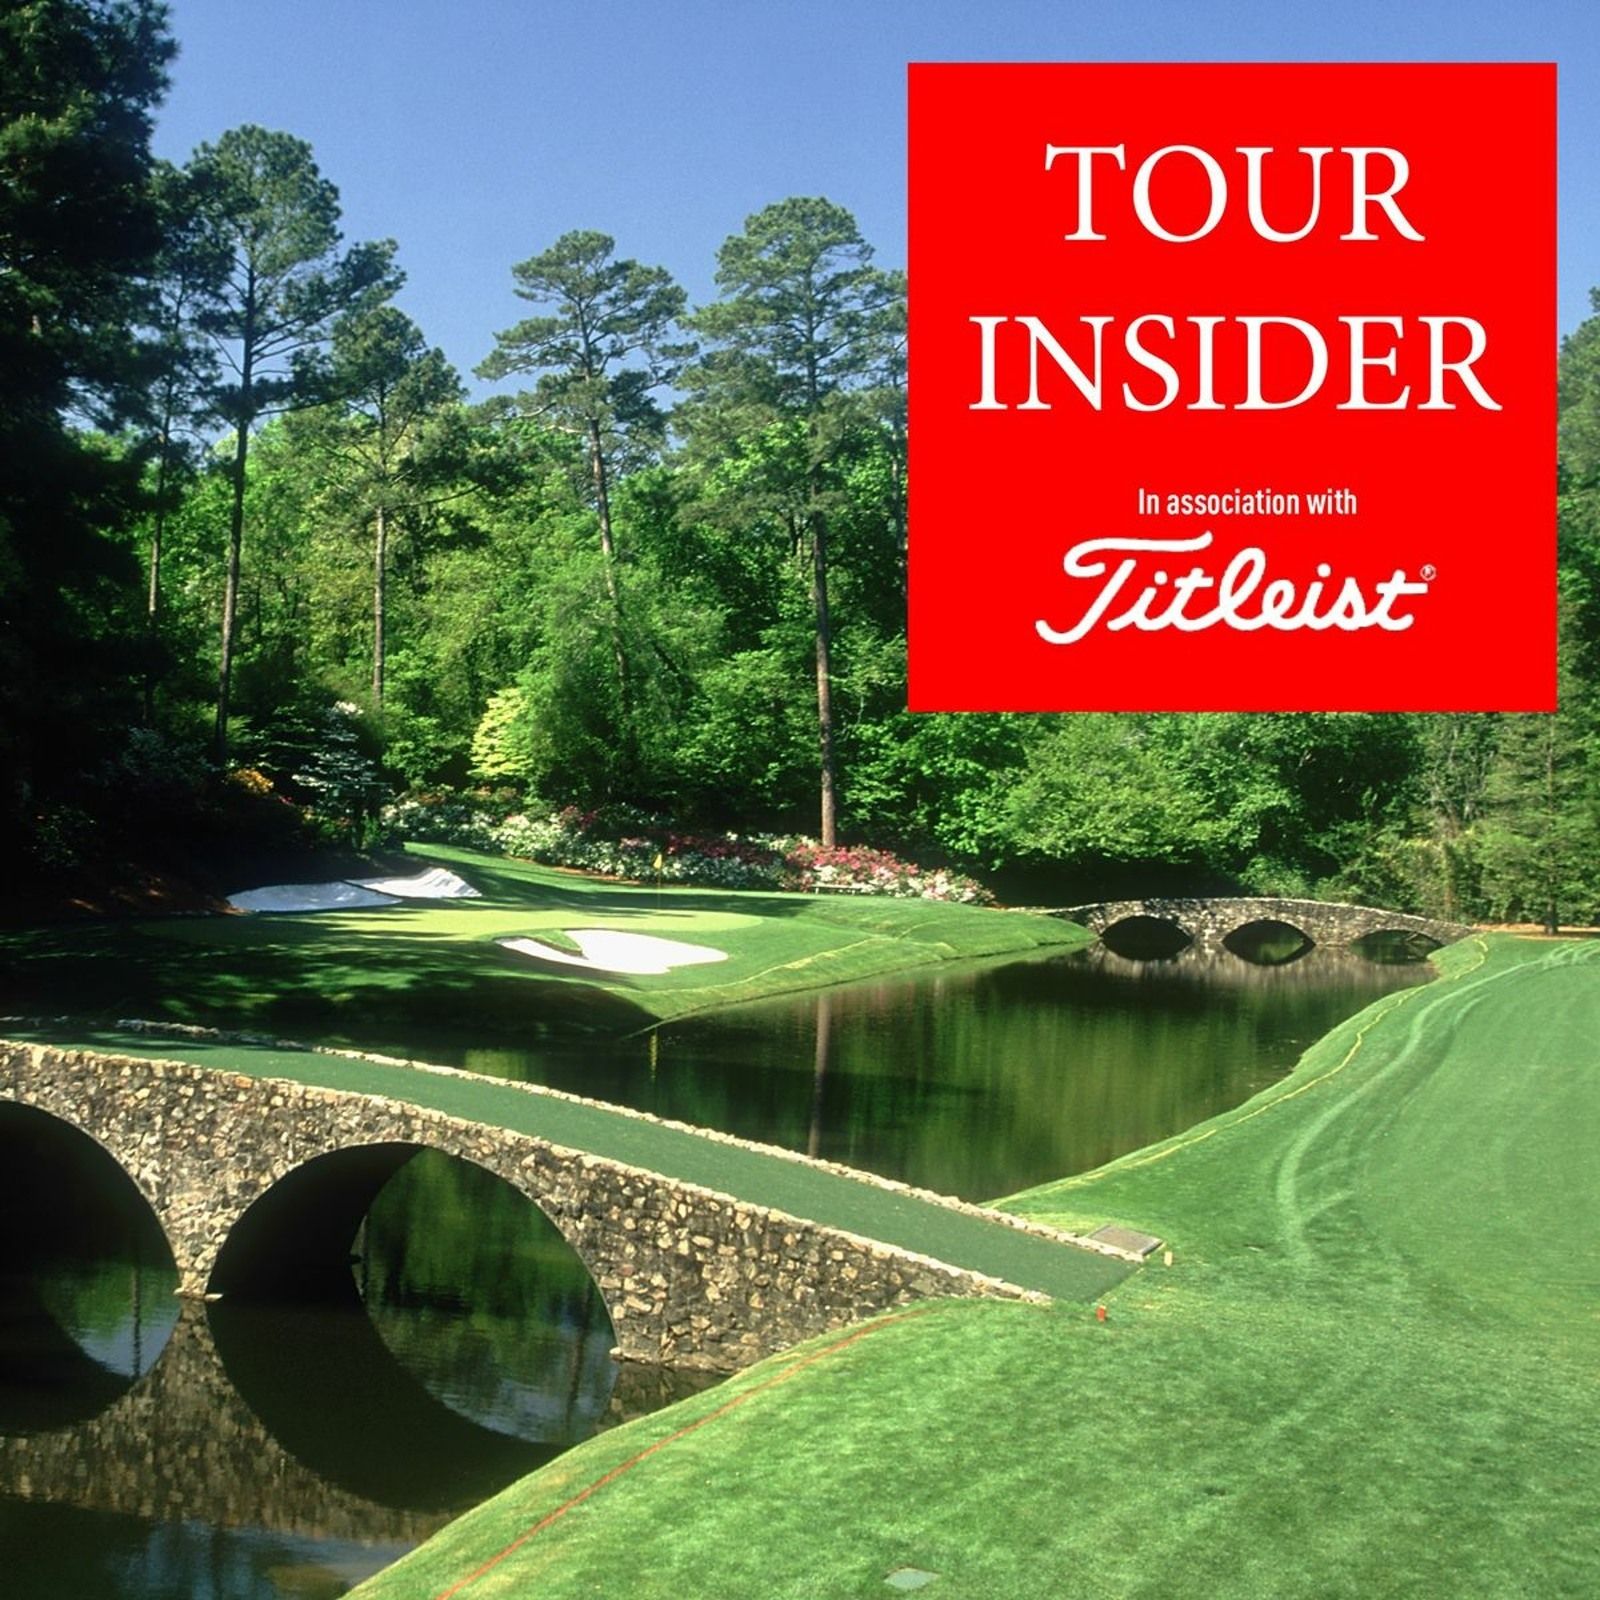 FedEx Cup Playoffs, Women's Open and the best 18 holes in the world